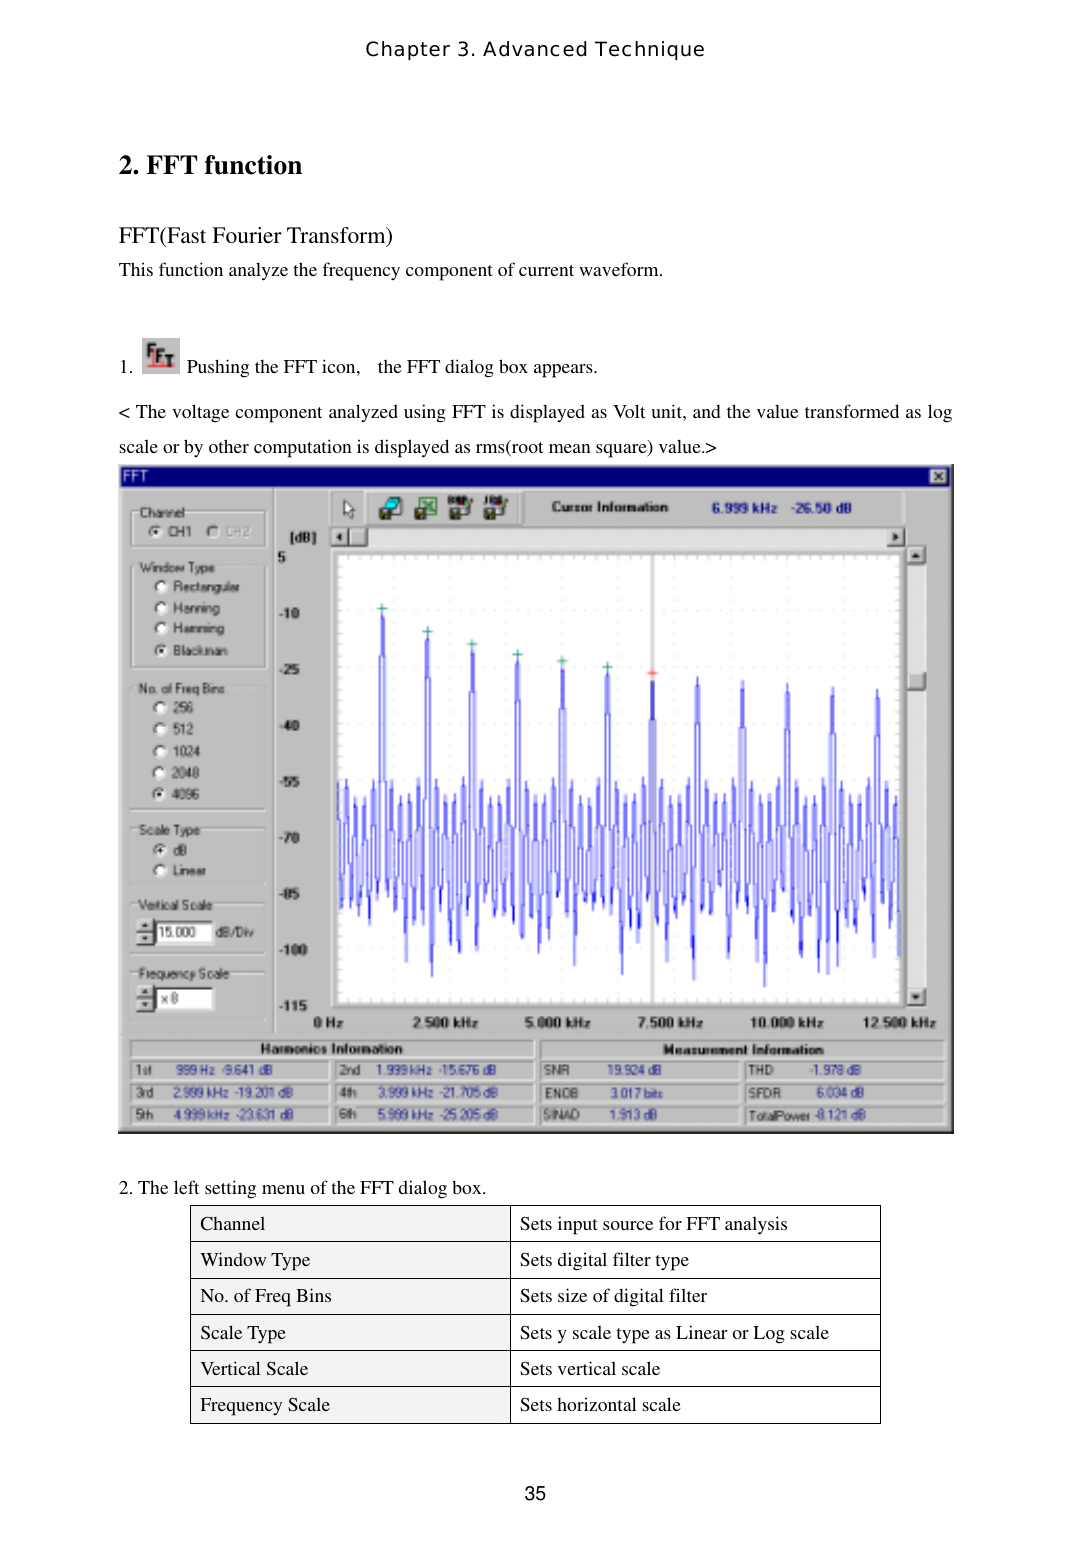 Chapter 3. Advanced Technique  352. FFT function  FFT(Fast Fourier Transform) This function analyze the frequency component of current waveform.  1.    Pushing the FFT icon,    the FFT dialog box appears.   &lt; The voltage component analyzed using FFT is displayed as Volt unit, and the value transformed as log scale or by other computation is displayed as rms(root mean square) value.&gt;       2. The left setting menu of the FFT dialog box. Channel  Sets input source for FFT analysis Window Type  Sets digital filter type No. of Freq Bins  Sets size of digital filter Scale Type  Sets y scale type as Linear or Log scale Vertical Scale  Sets vertical scale Frequency Scale  Sets horizontal scale 